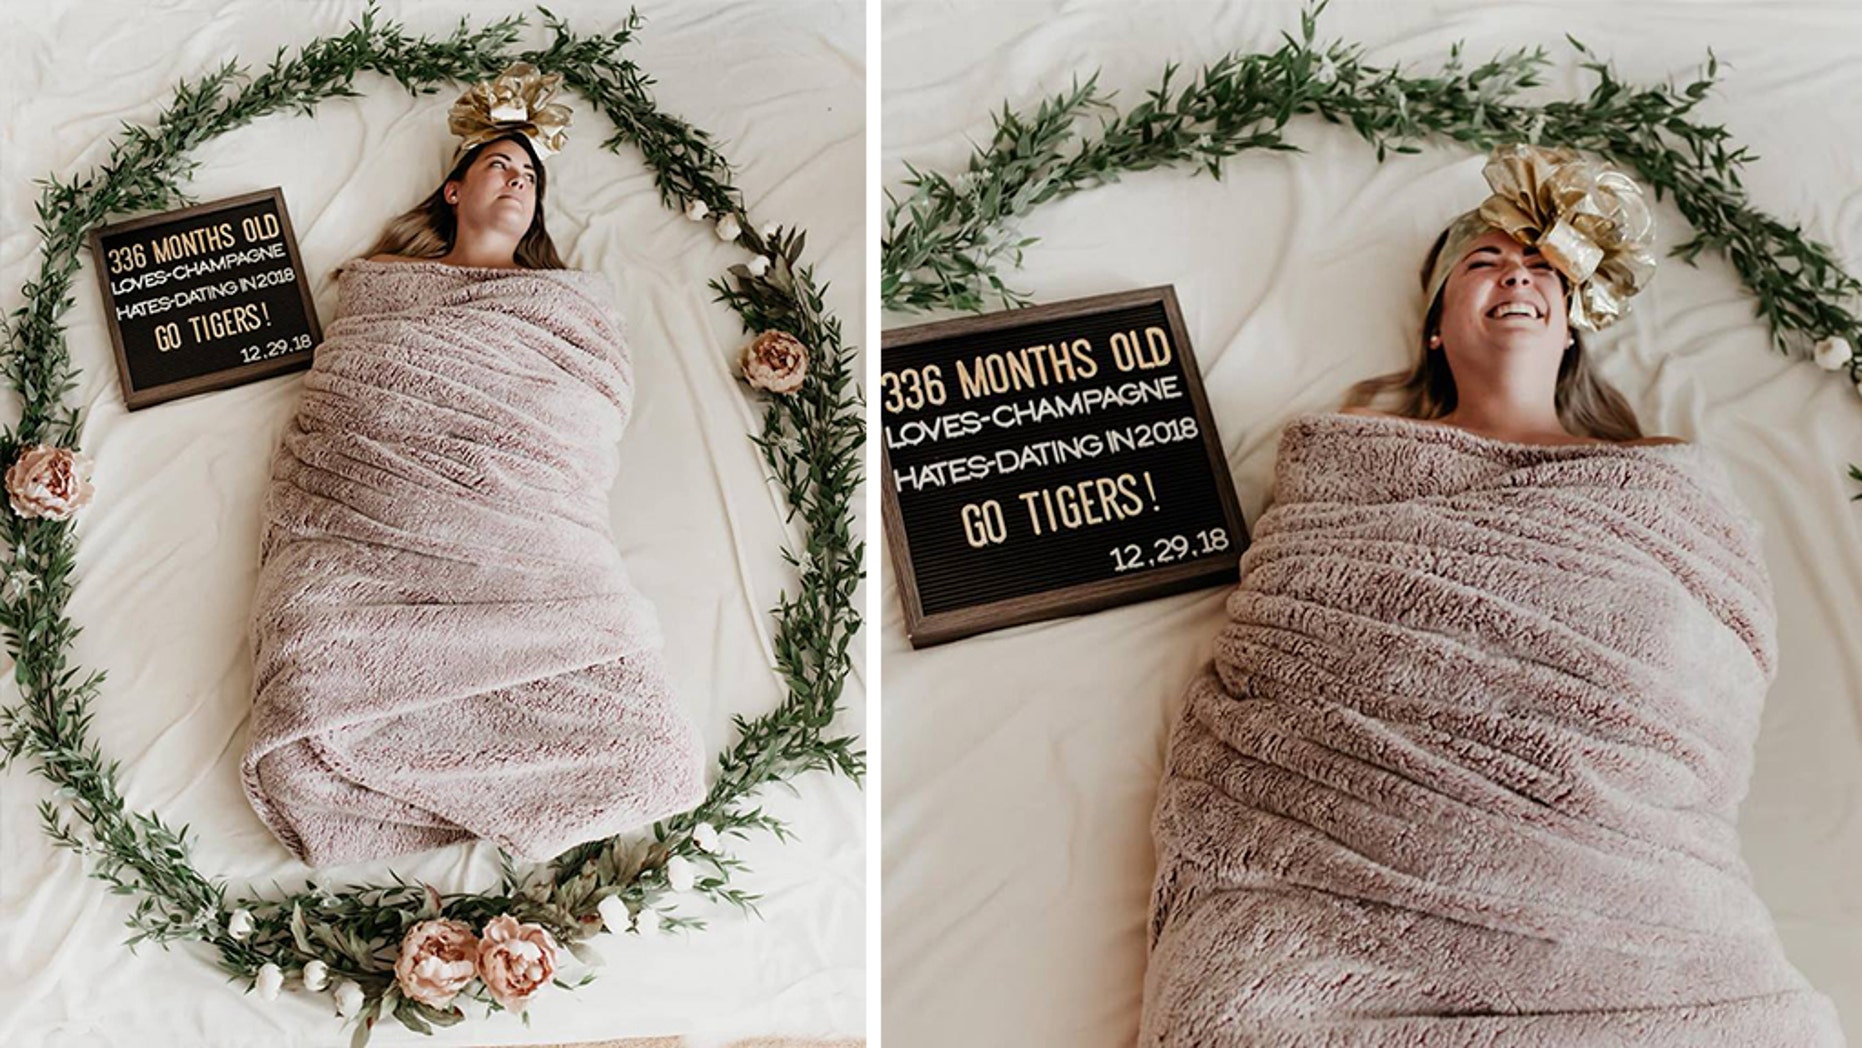 Grown woman swaddled for birthday photo shoot: ‘Your best friend only turns 336 months once’